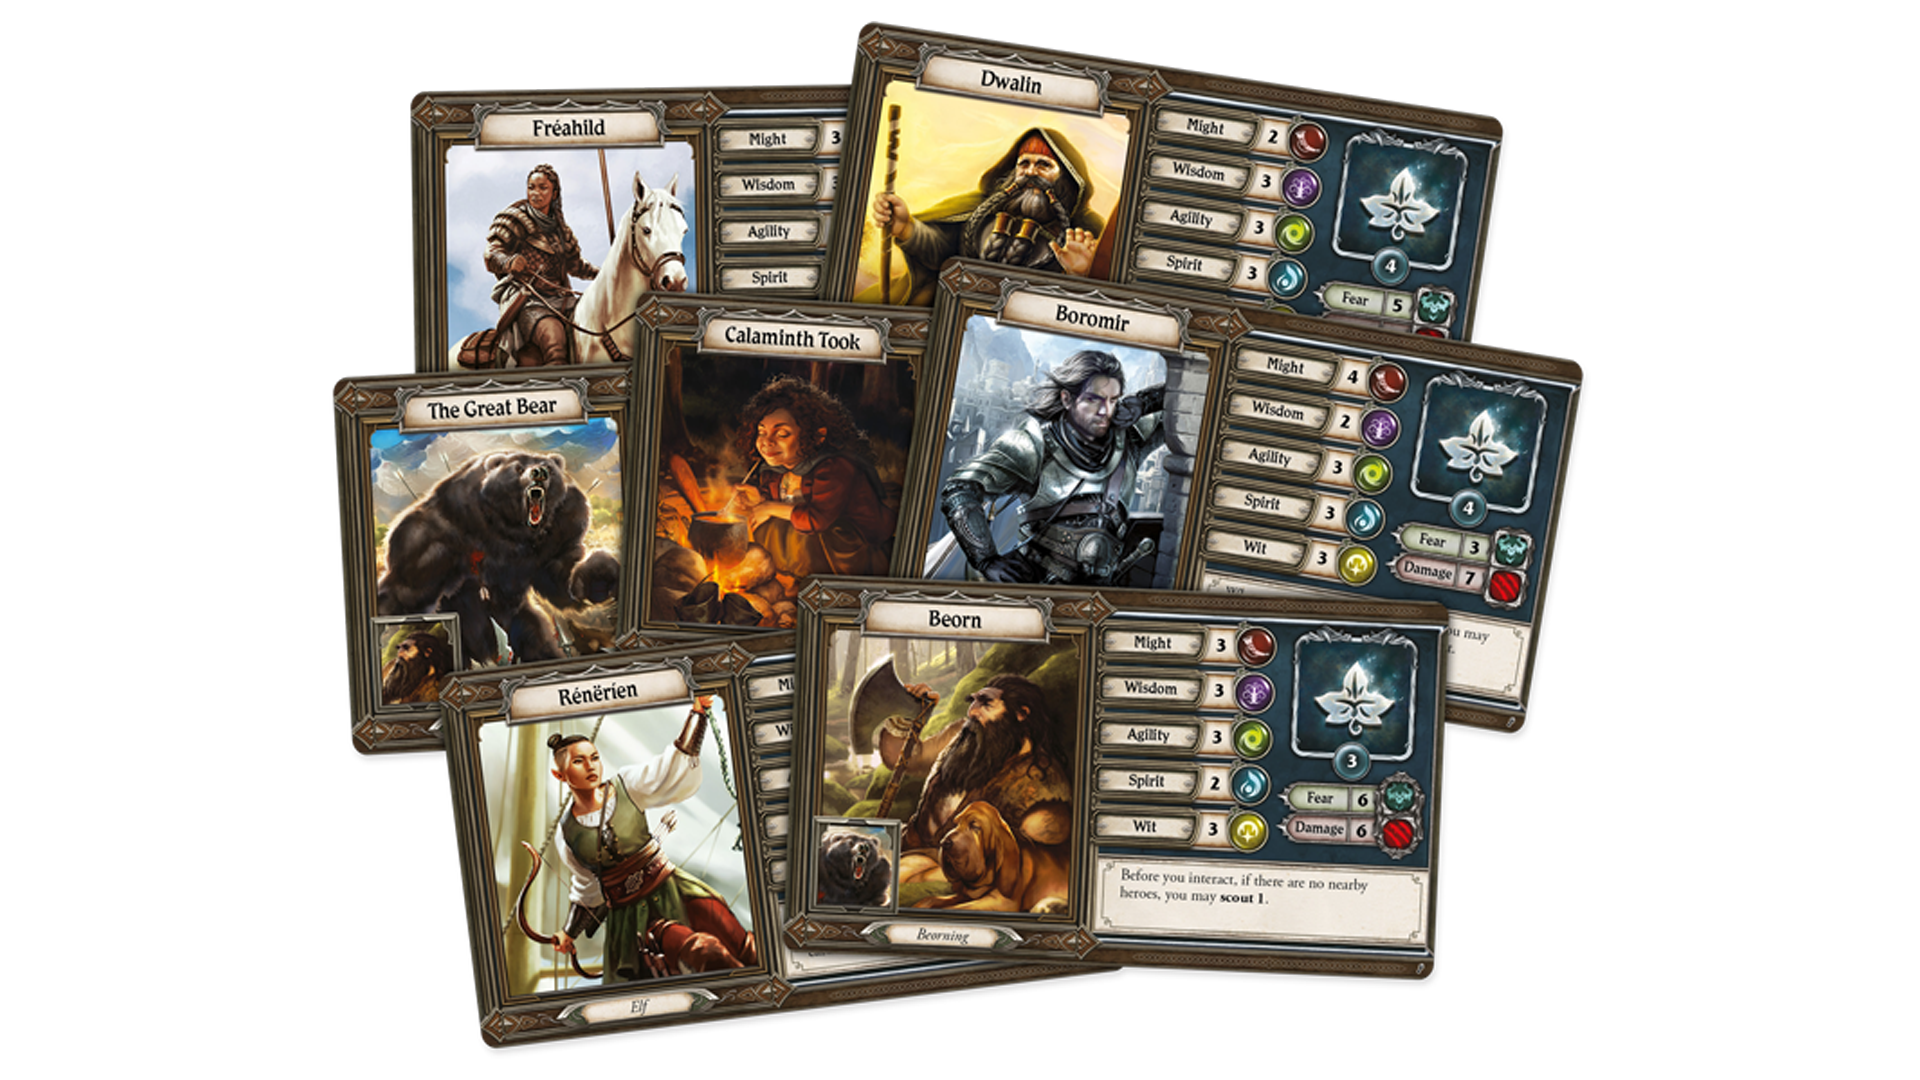 Lord of the Rings: Journey in Middle-earth - Spreading War character cards